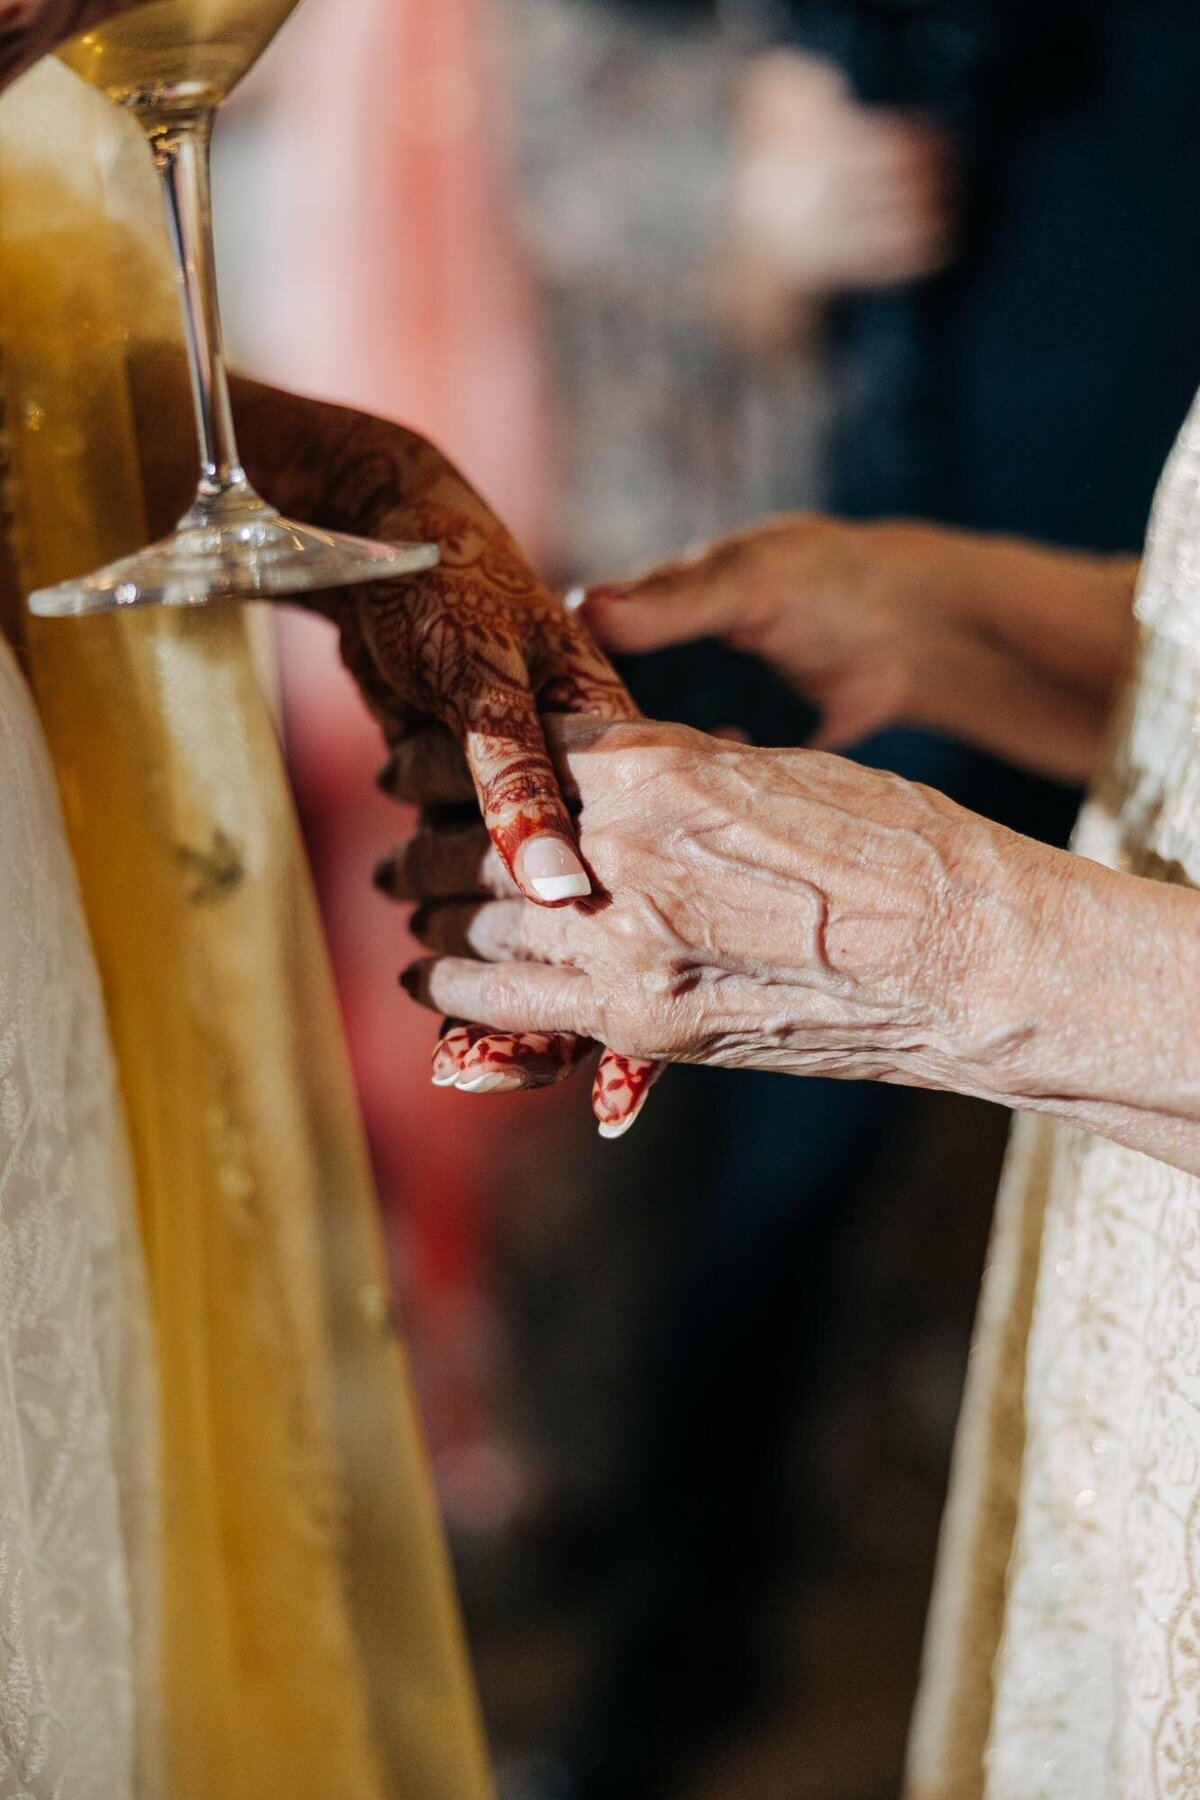 A close-up of a young woman's hand with henna tattoos touching an elderly woman's hand during a cultural event.